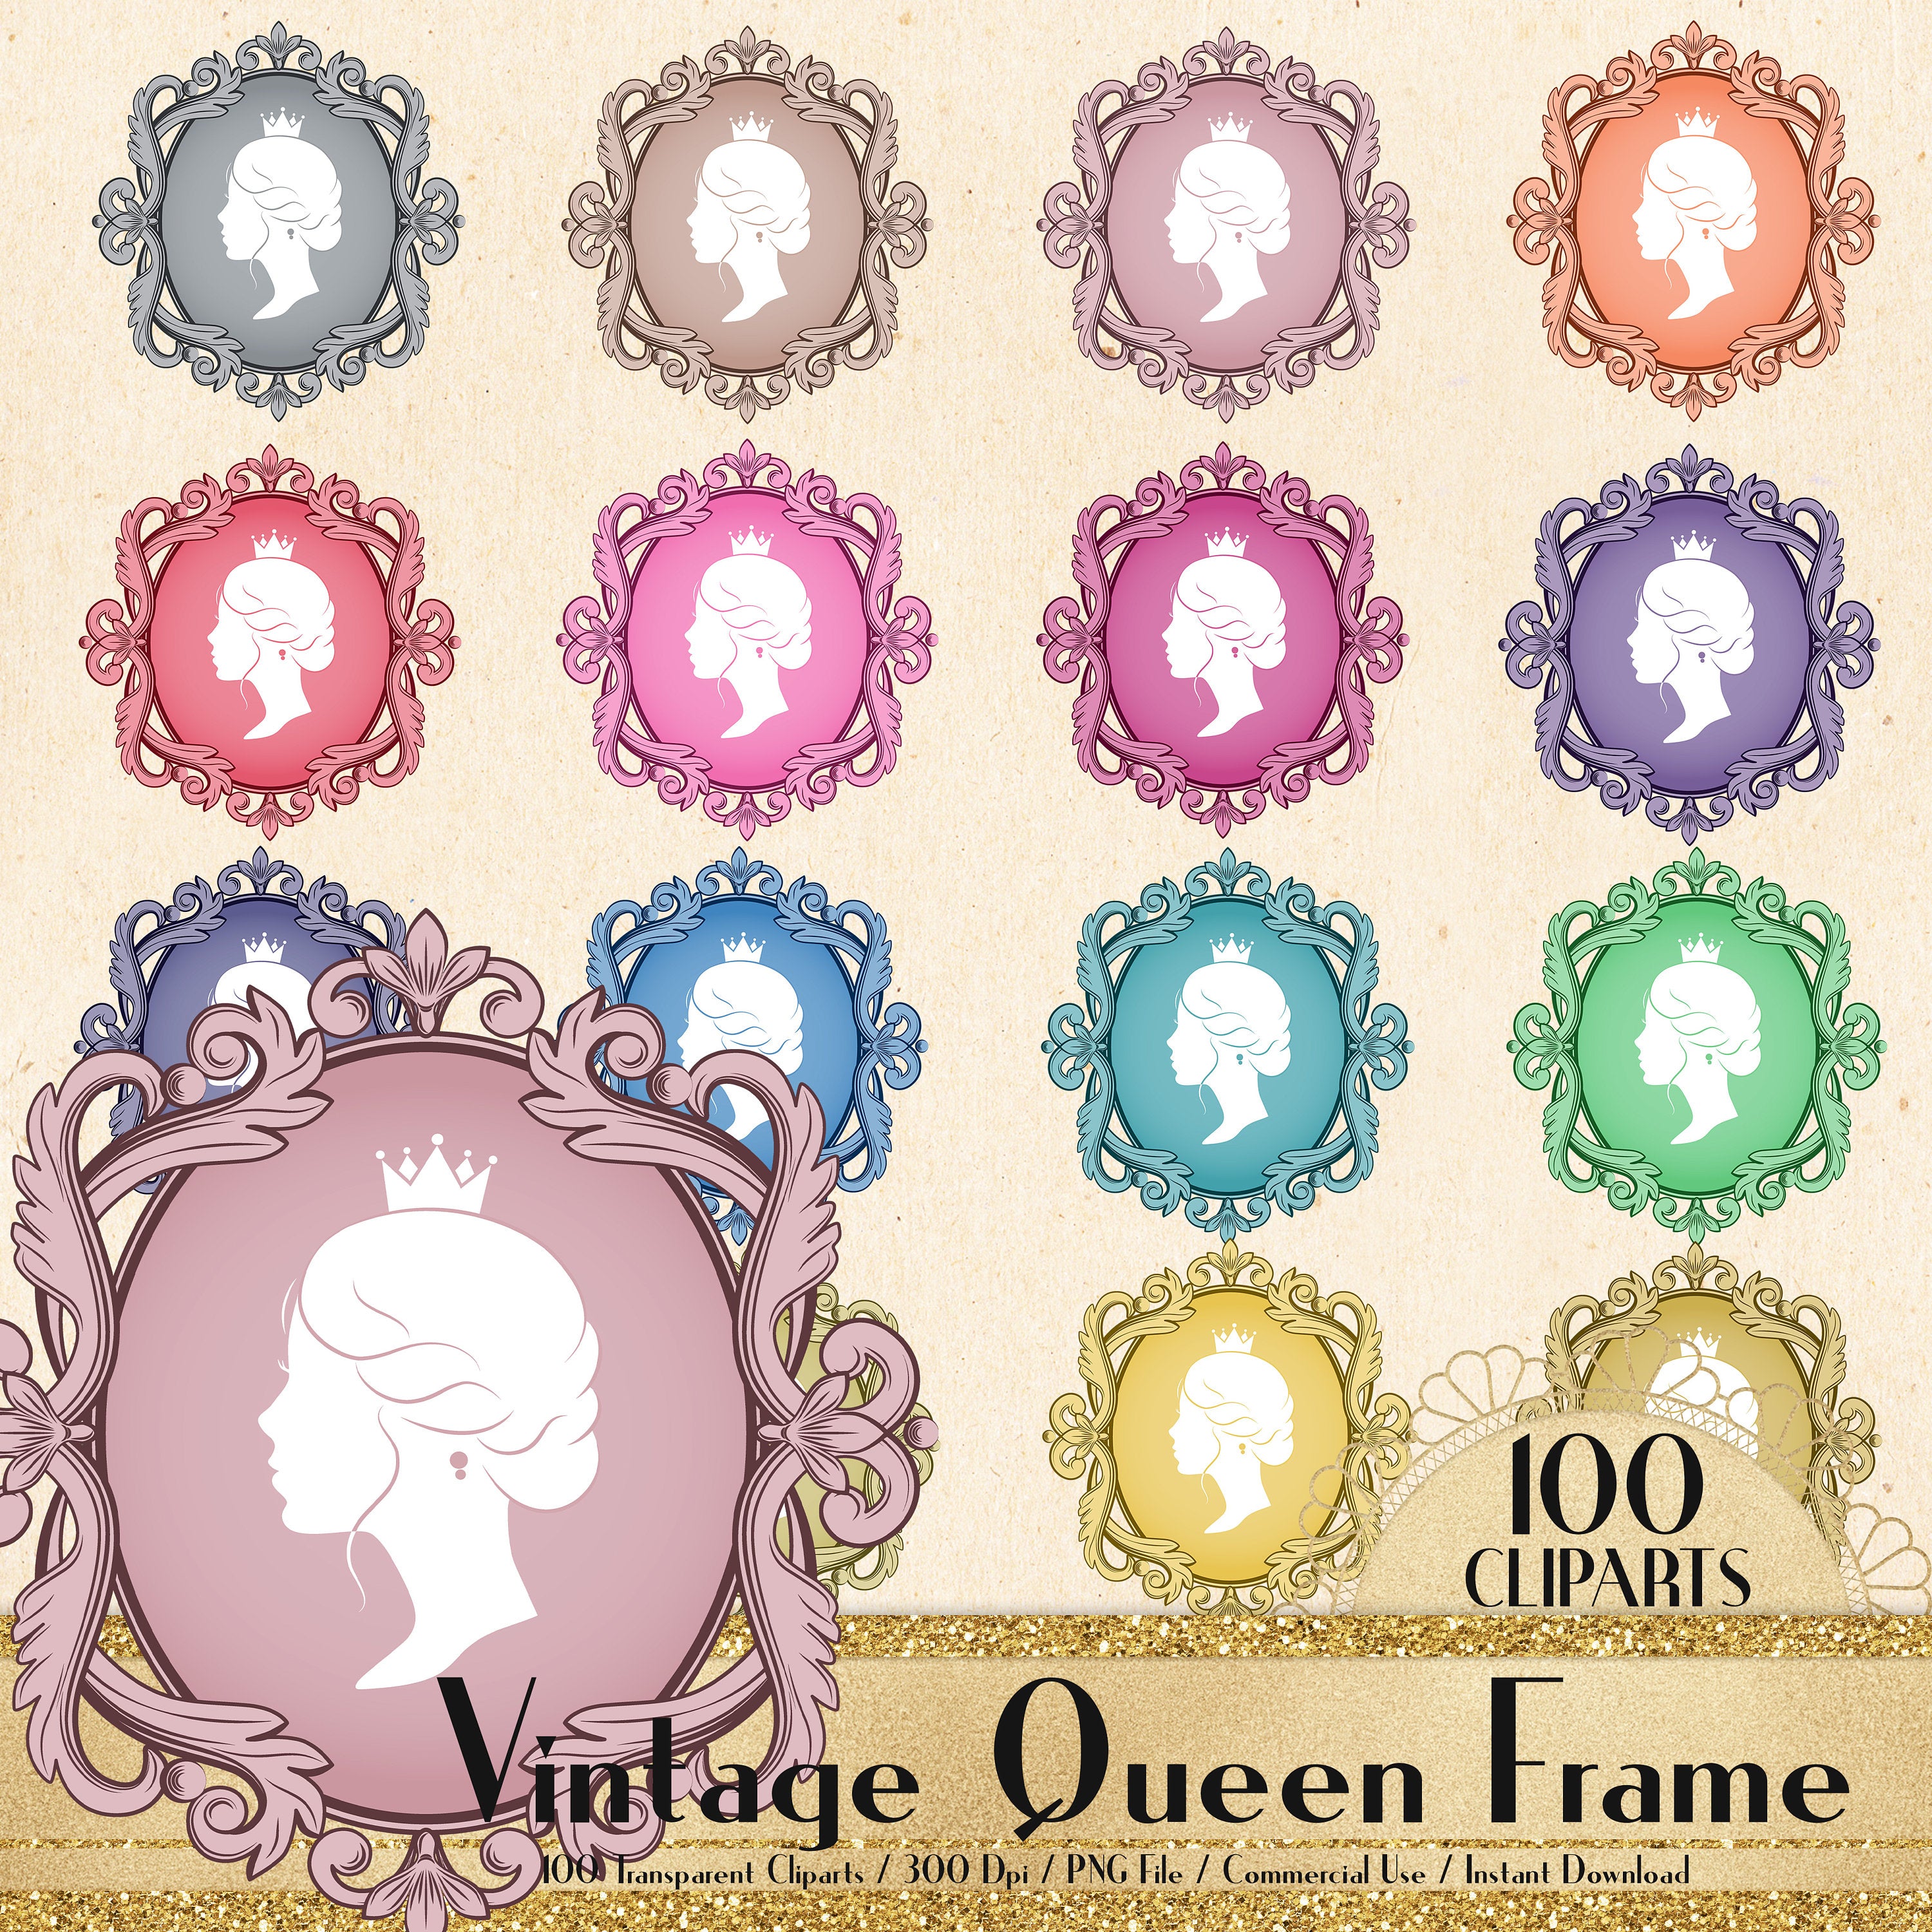 100 Vintage Royal Queen Frame Cliparts, Antique Frame, Ancient Frame, Commercial Use, Planner Clipart, Royal Frame, Queen, Princess, Jewelry